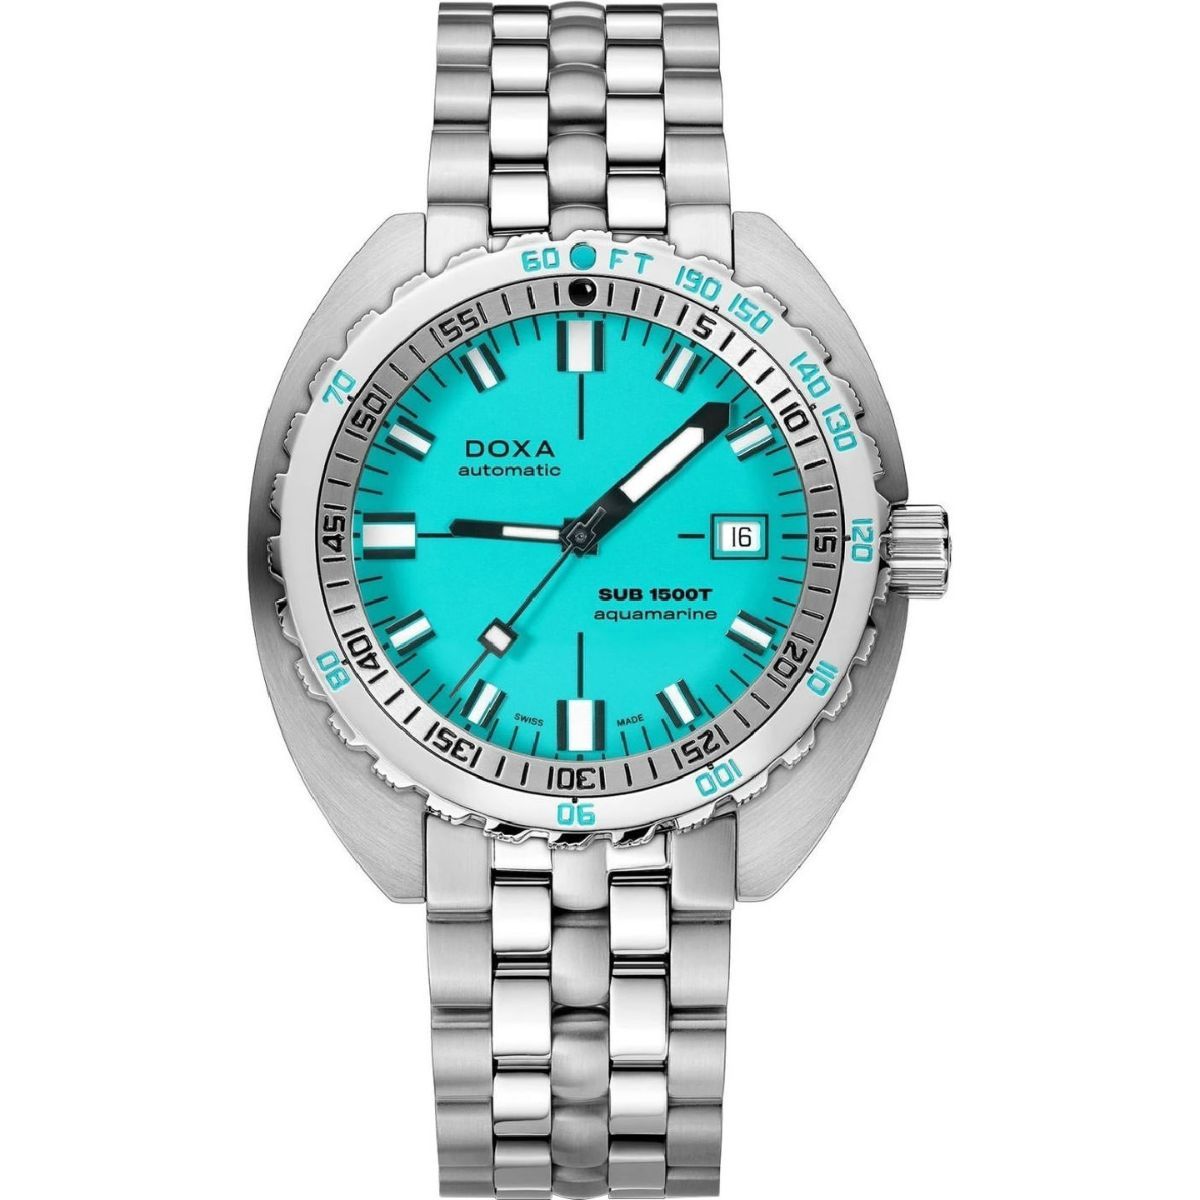 Fossil Heritage Analog Turquoise Dial Men's Watch-ME3241 : Amazon.in:  Watches